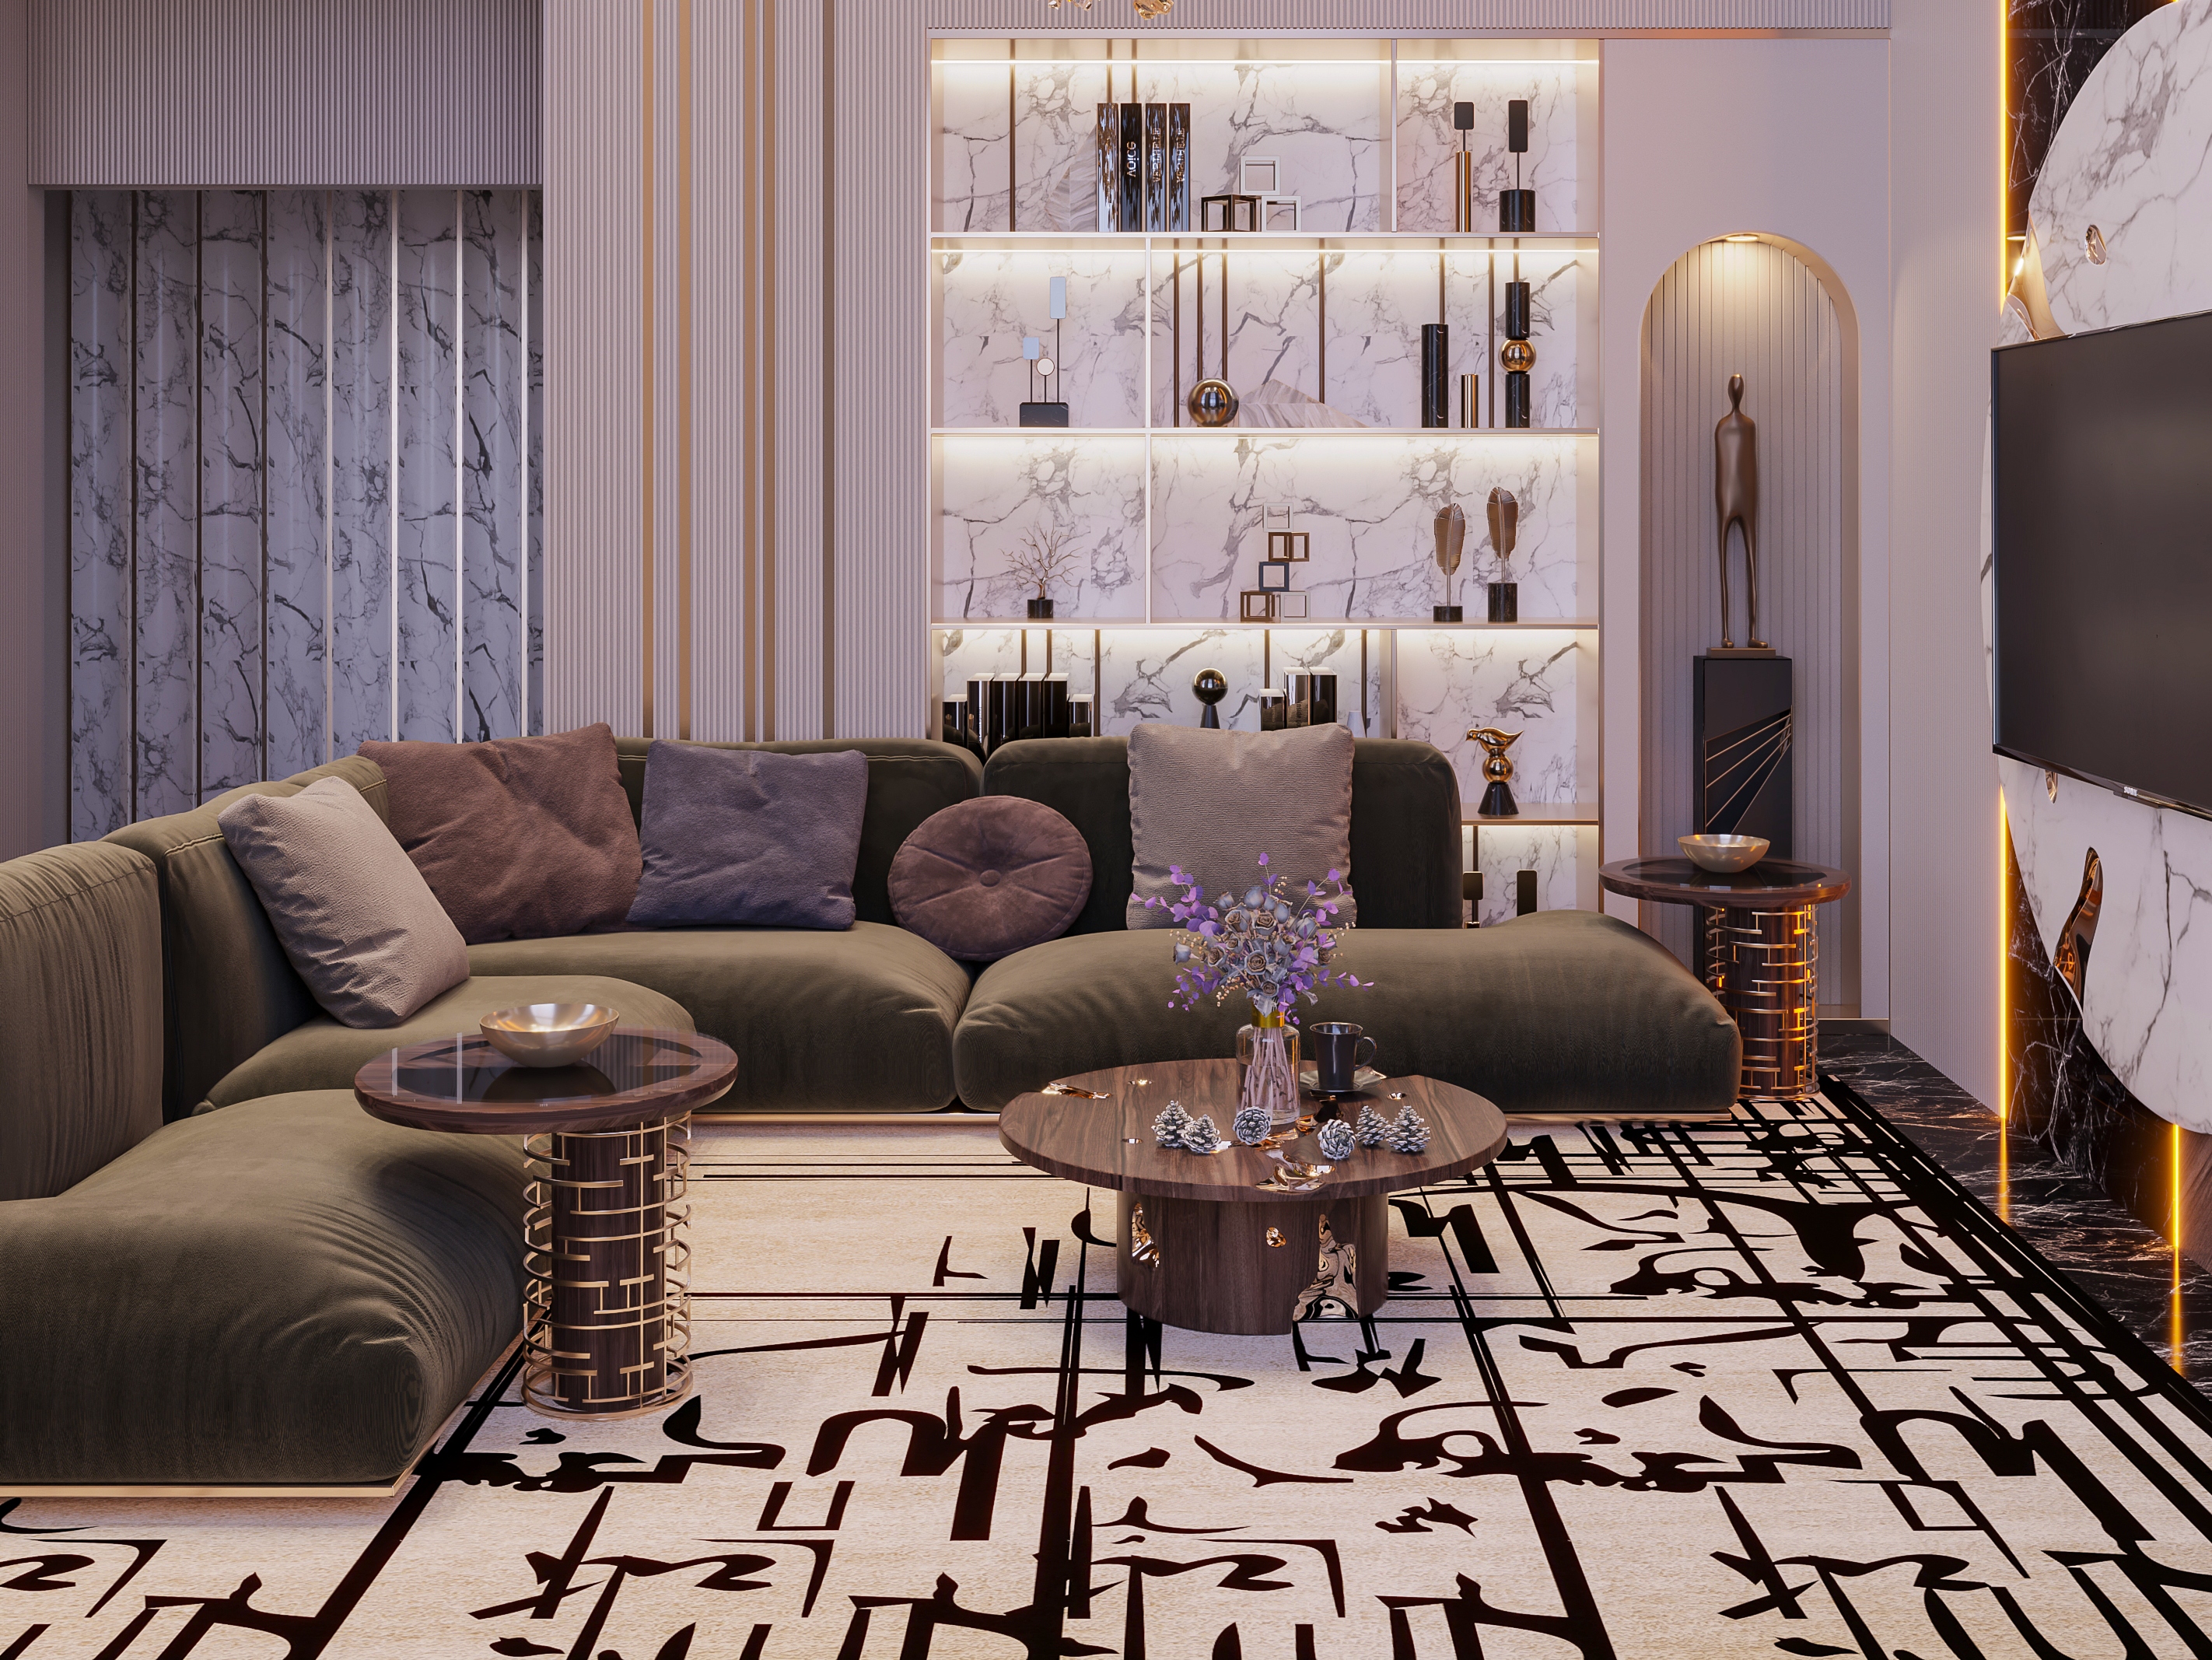 Majestic Modern contemporary Living Room With Black Ink Rug by Rug'Society